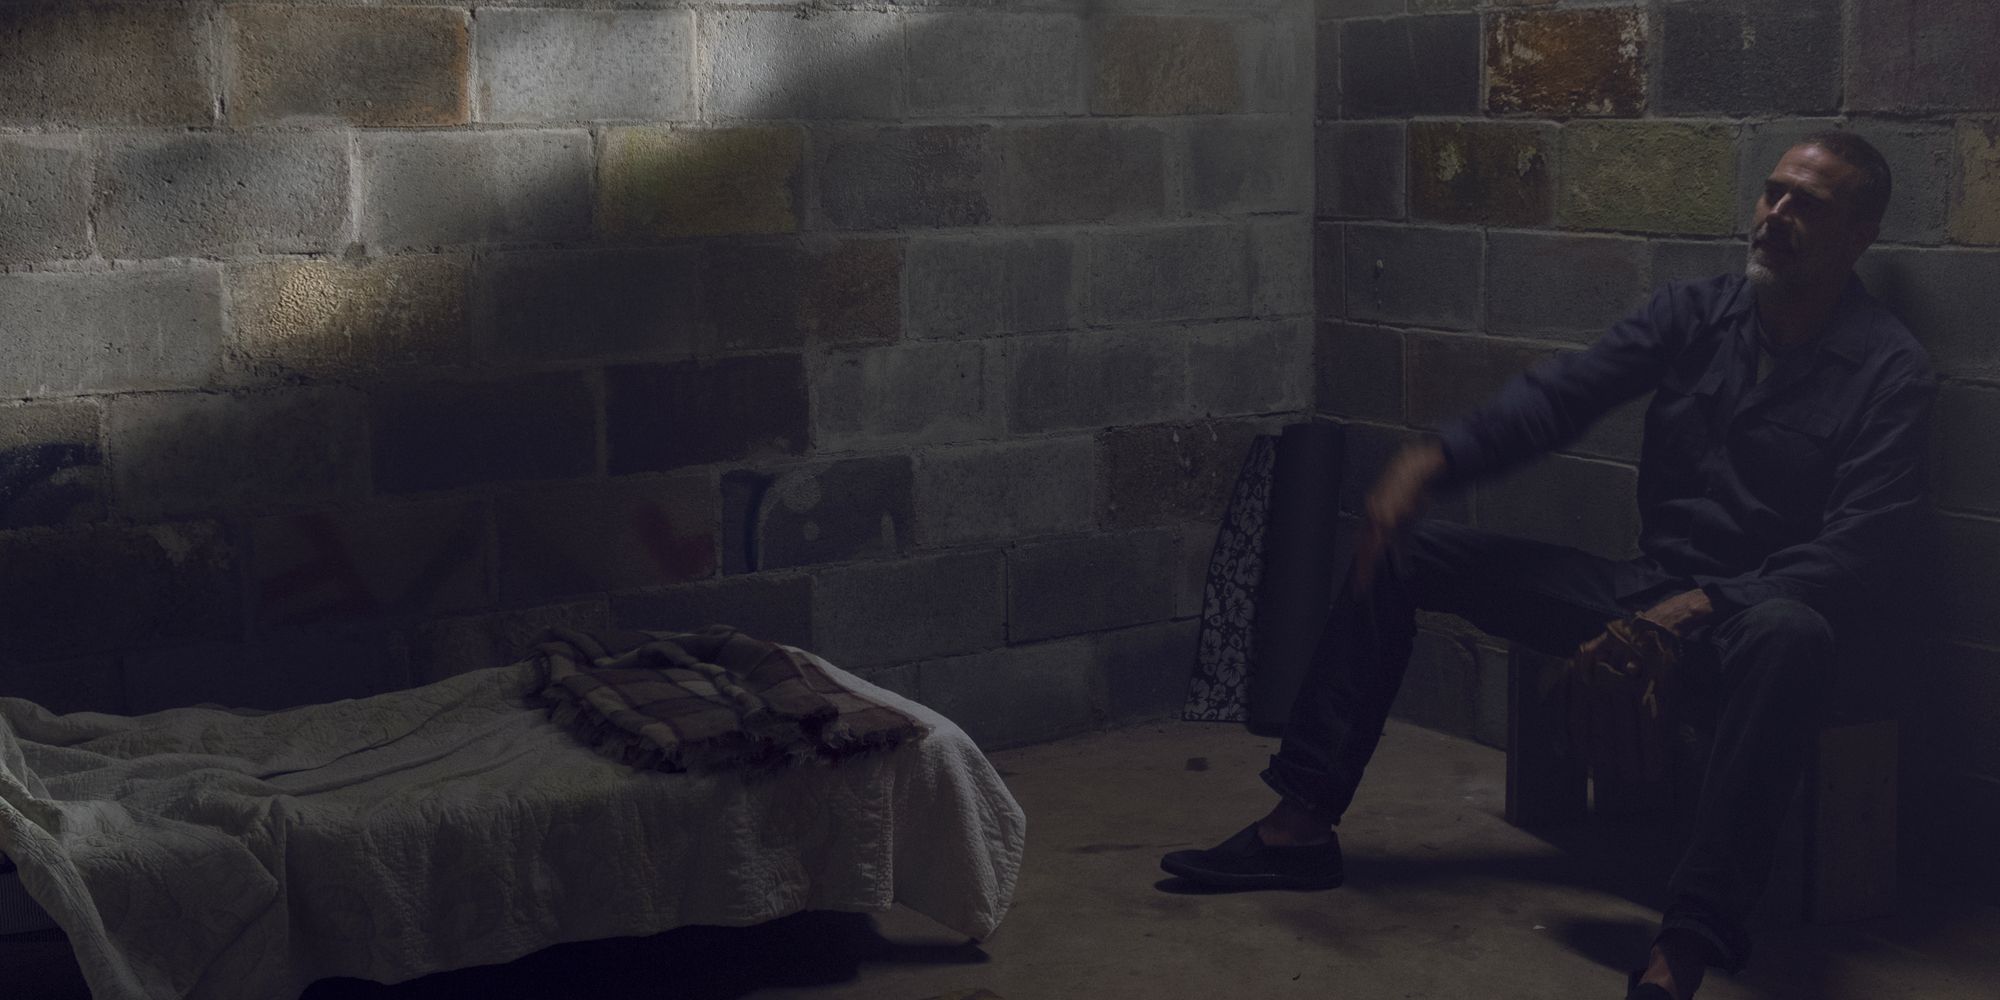 Negan (Jeffrey Dean Morgan) throws something while sitting against the wall in his cell in Alexandria.